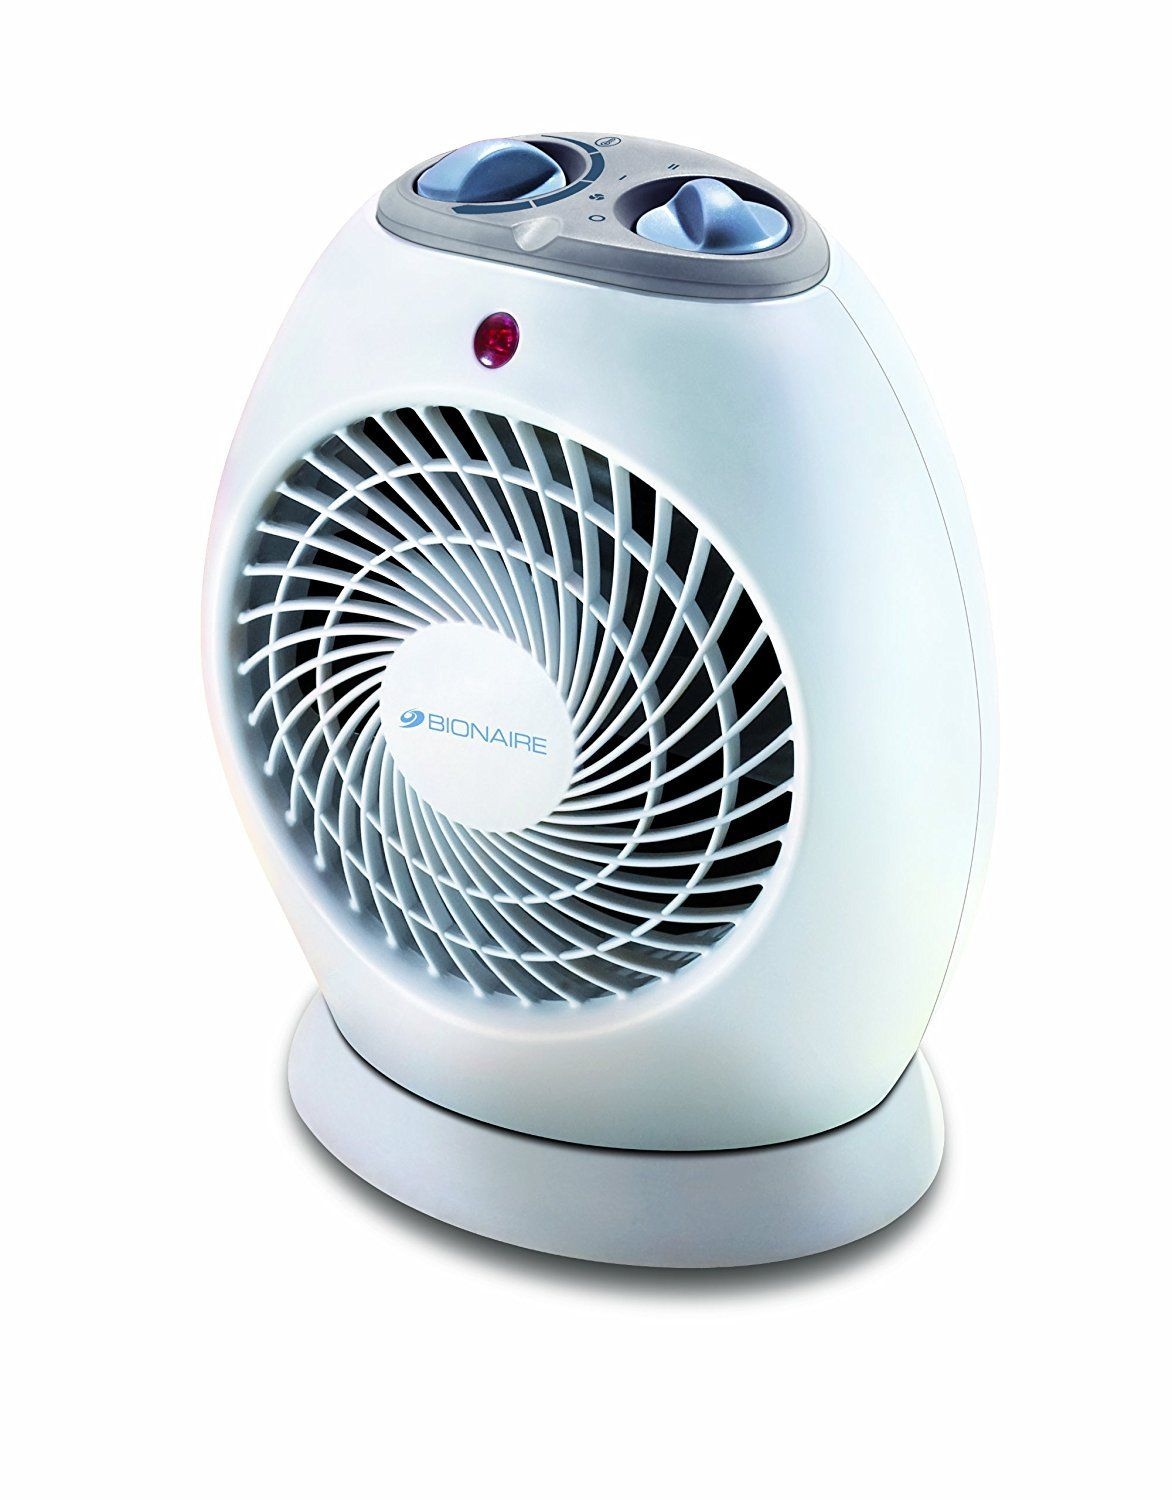 Details About Bionaire Bfh251 Compact Fan Heater Cooler Cool Blow 2kw Ip21 Thermostat 2 Speed intended for proportions 1172 X 1500